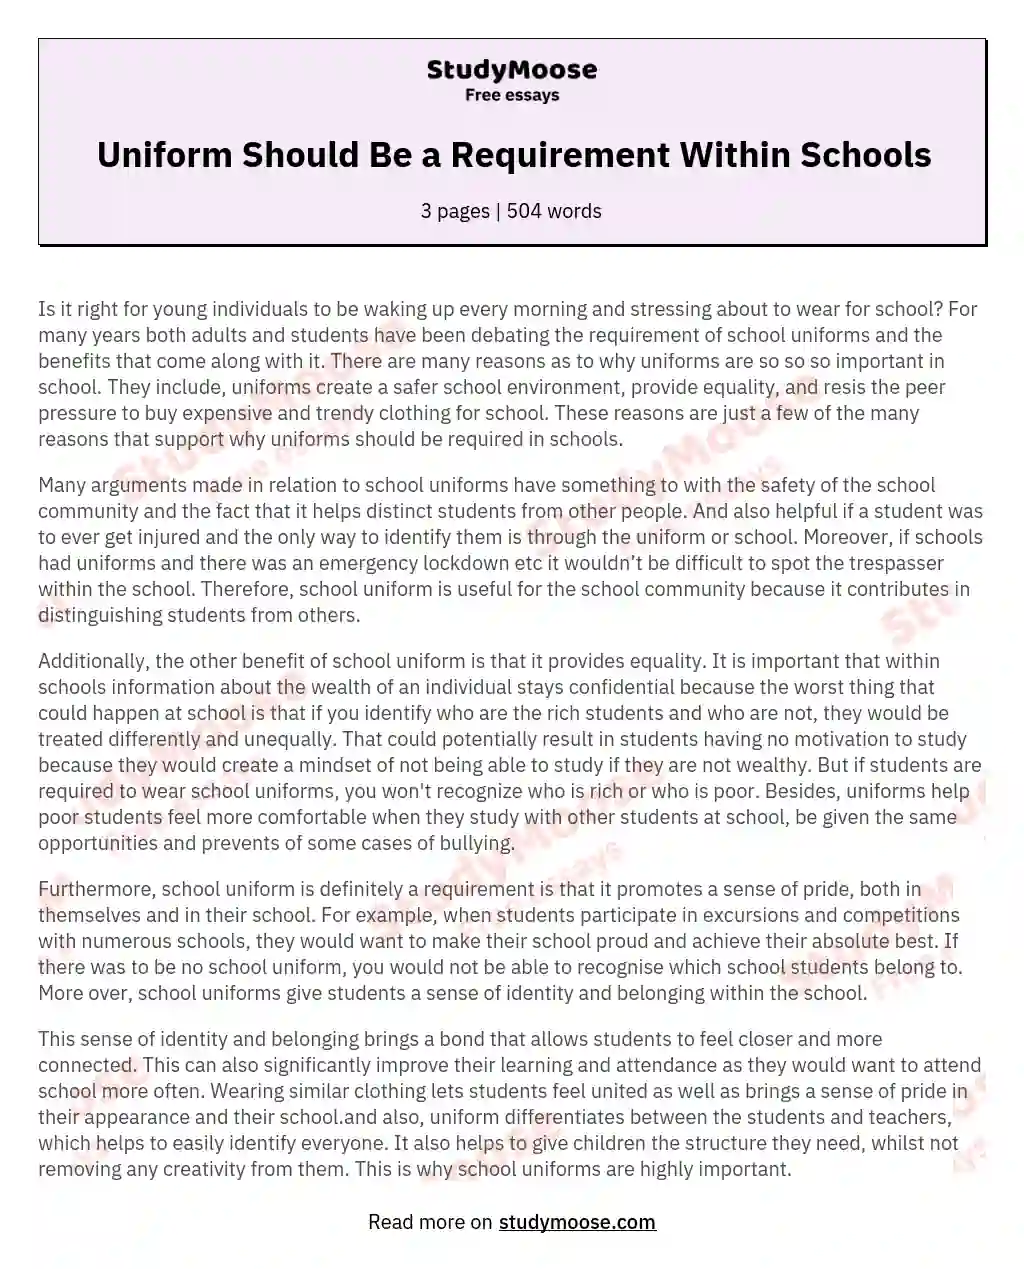 Uniform Should Be a Requirement Within Schools essay